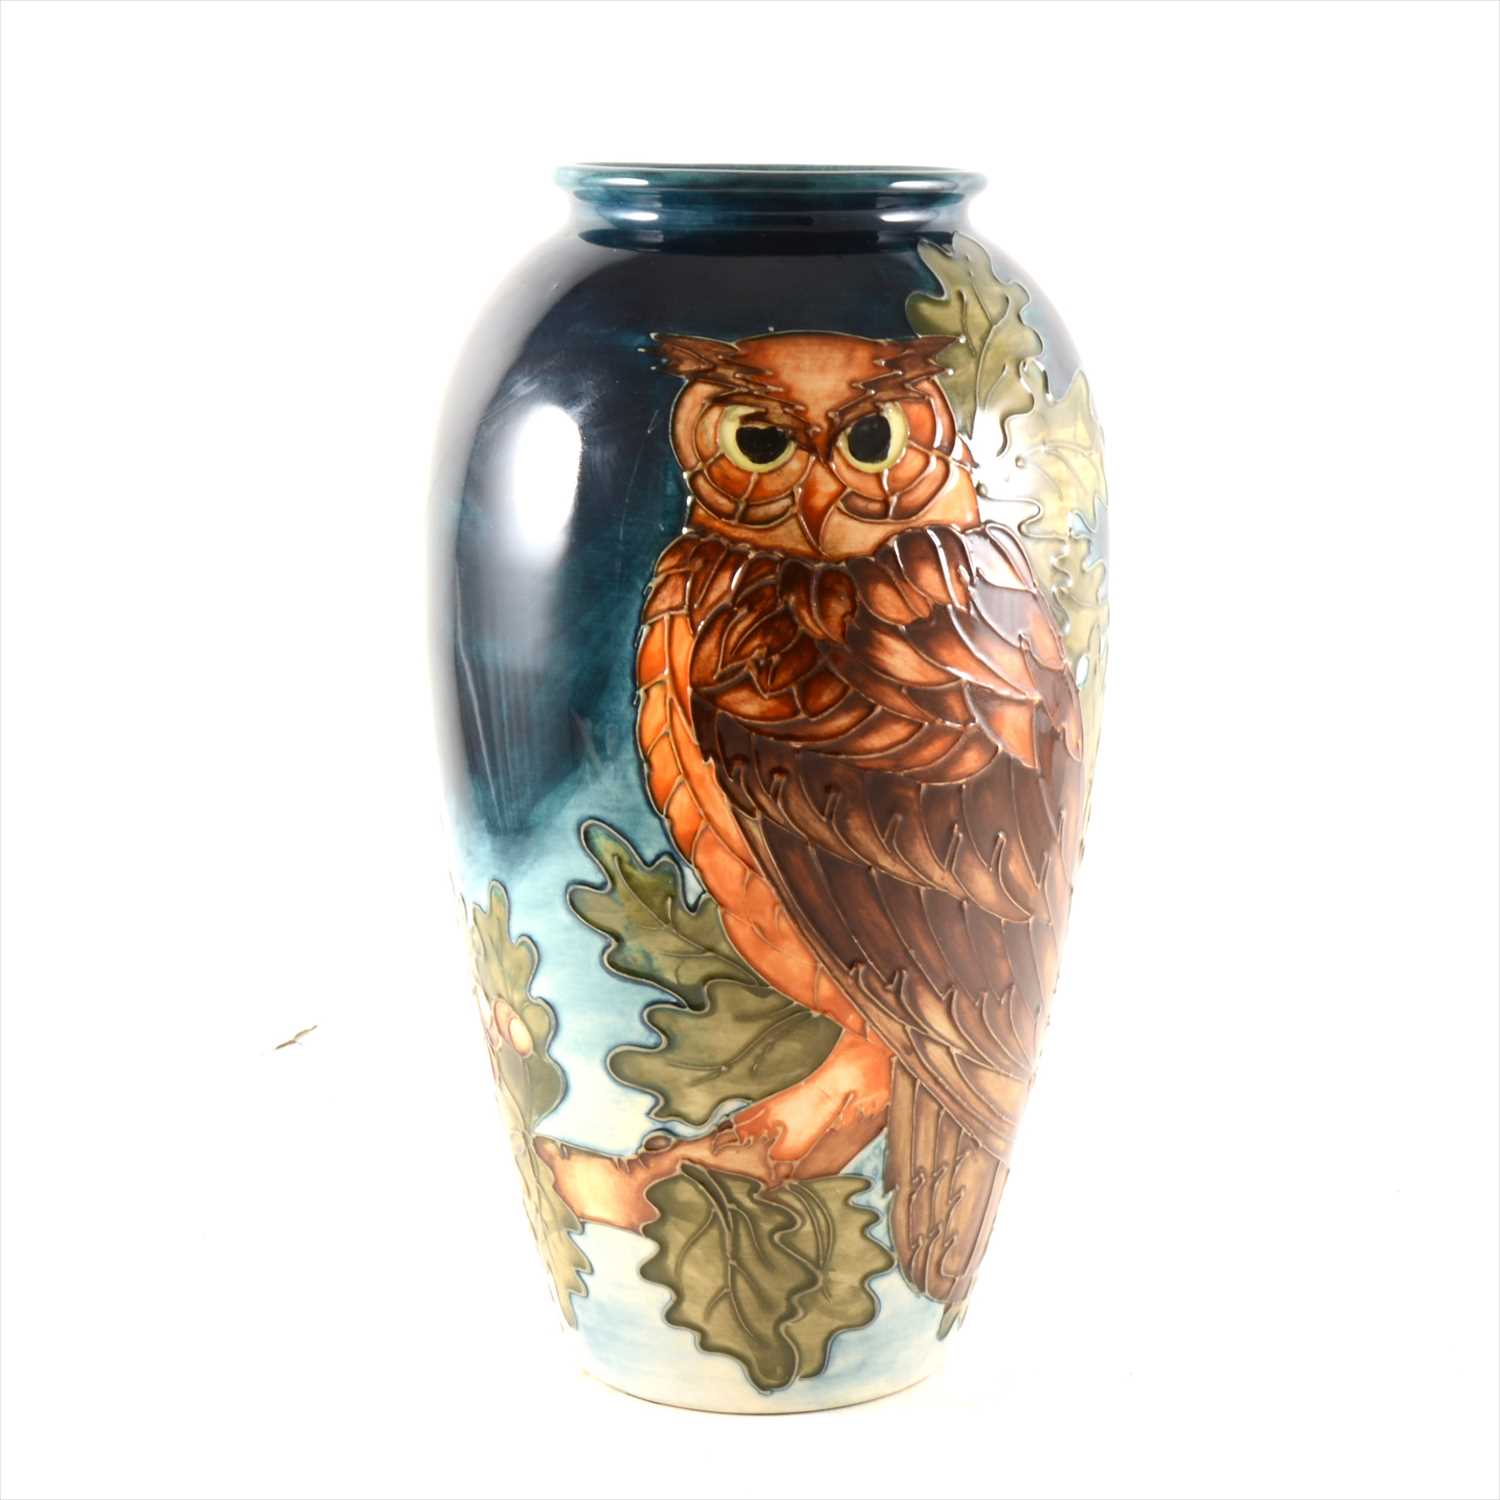 Lot 1 - An 'Eagle Owl' limited edition vase, designed by Sally Tuffin for Moorcroft Pottery